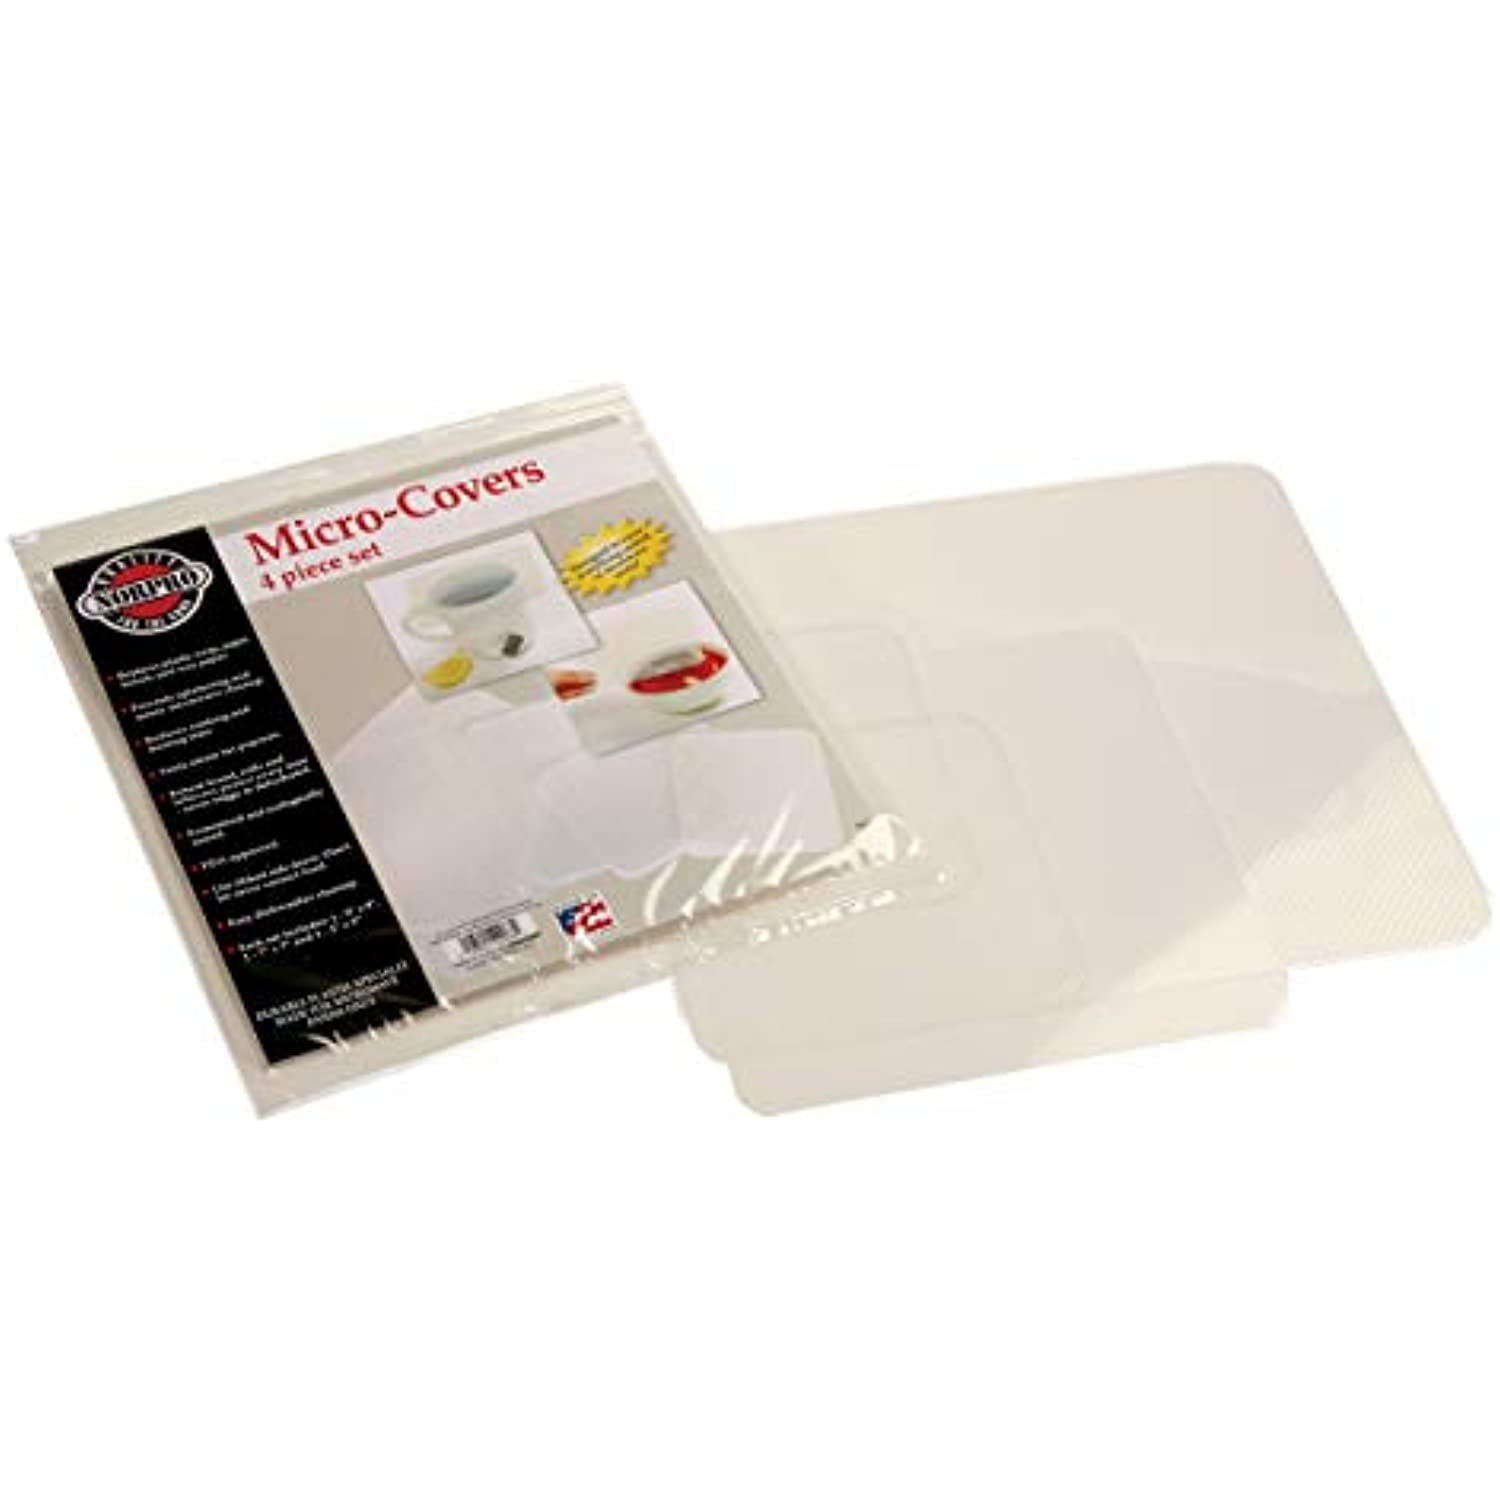  Coralpearl Automatic Microwave Plate Cover Magnetic